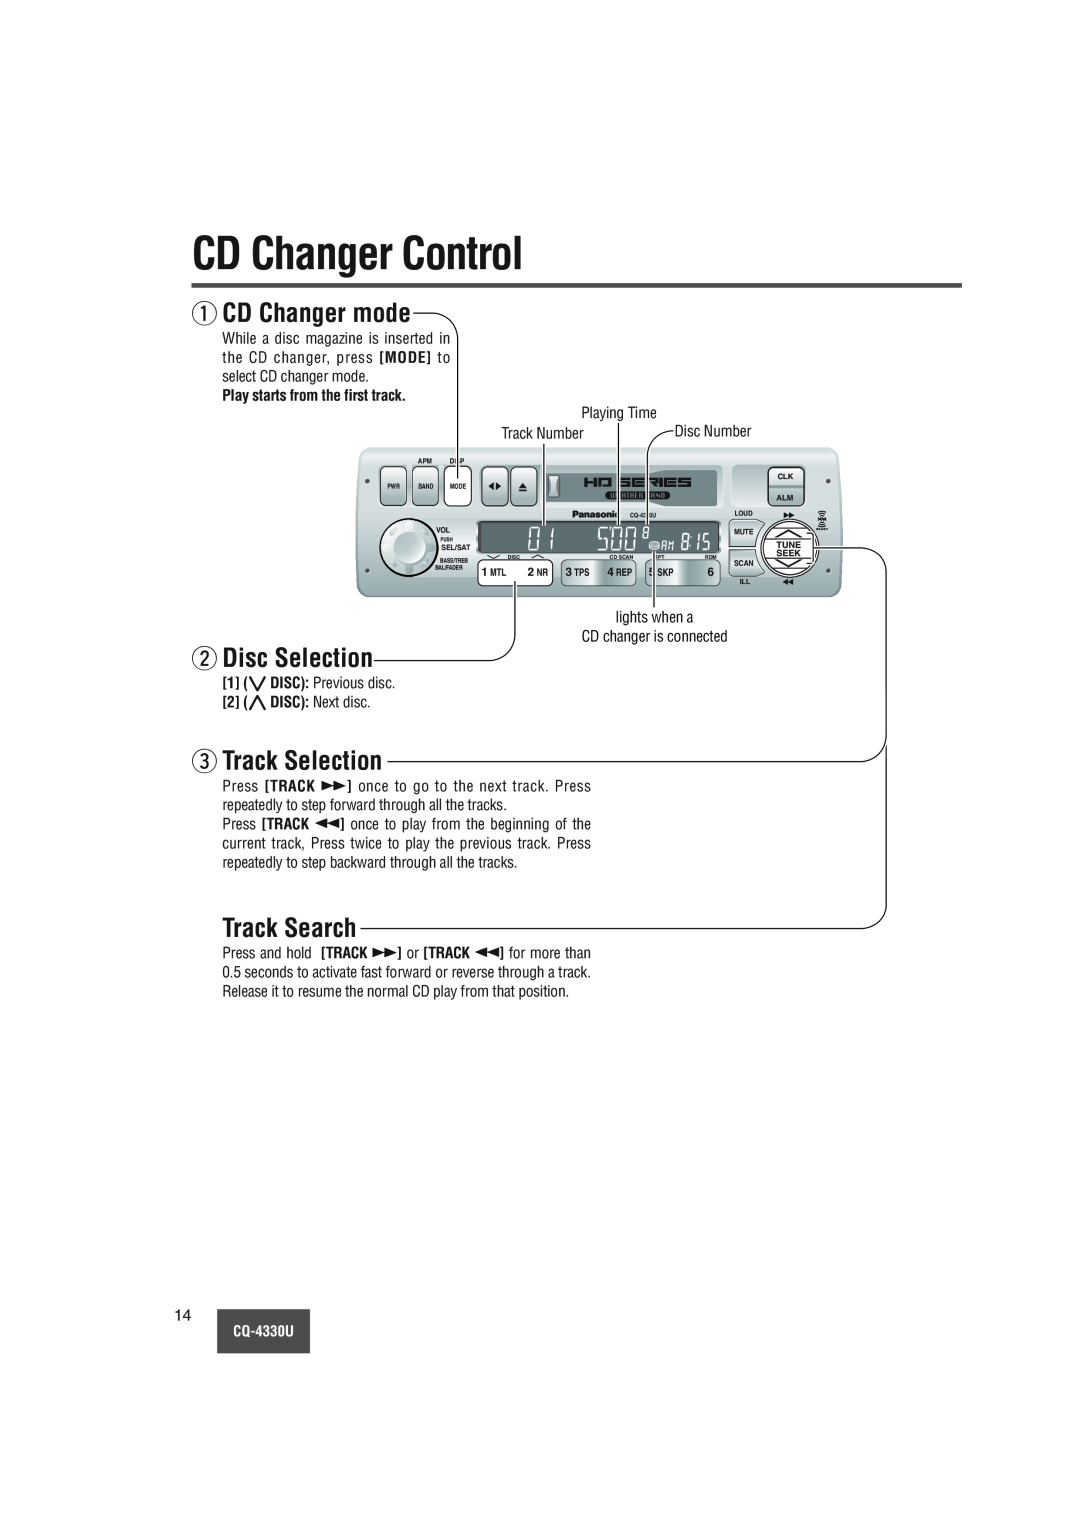 Panasonic CQ-4330U CD Changer Control, q CD Changer mode, w Disc Selection, e Track Selection, Track Search, Playing Time 